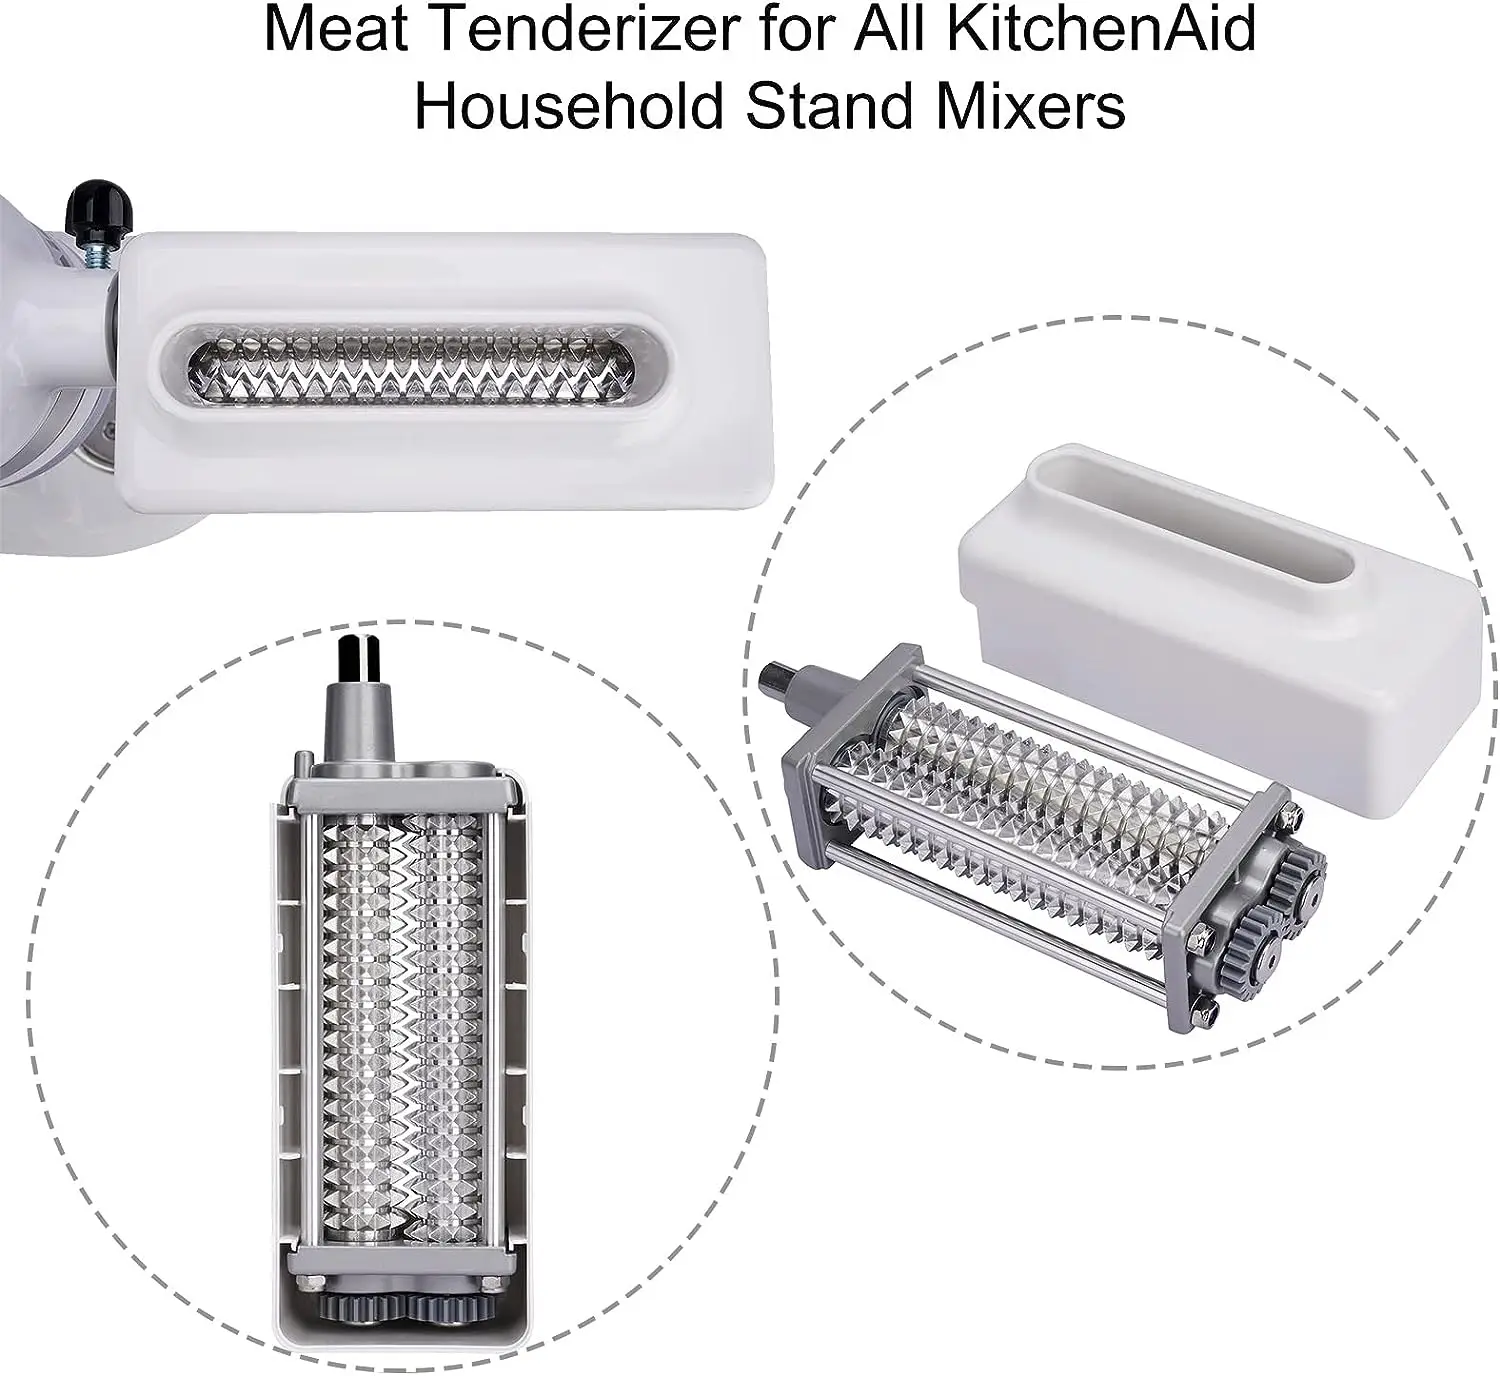 Meat Tenderizer Attachment for All KitchenAid Household Stand Mixers- Mixers  Accesssories Meat Tenderizers - AliExpress